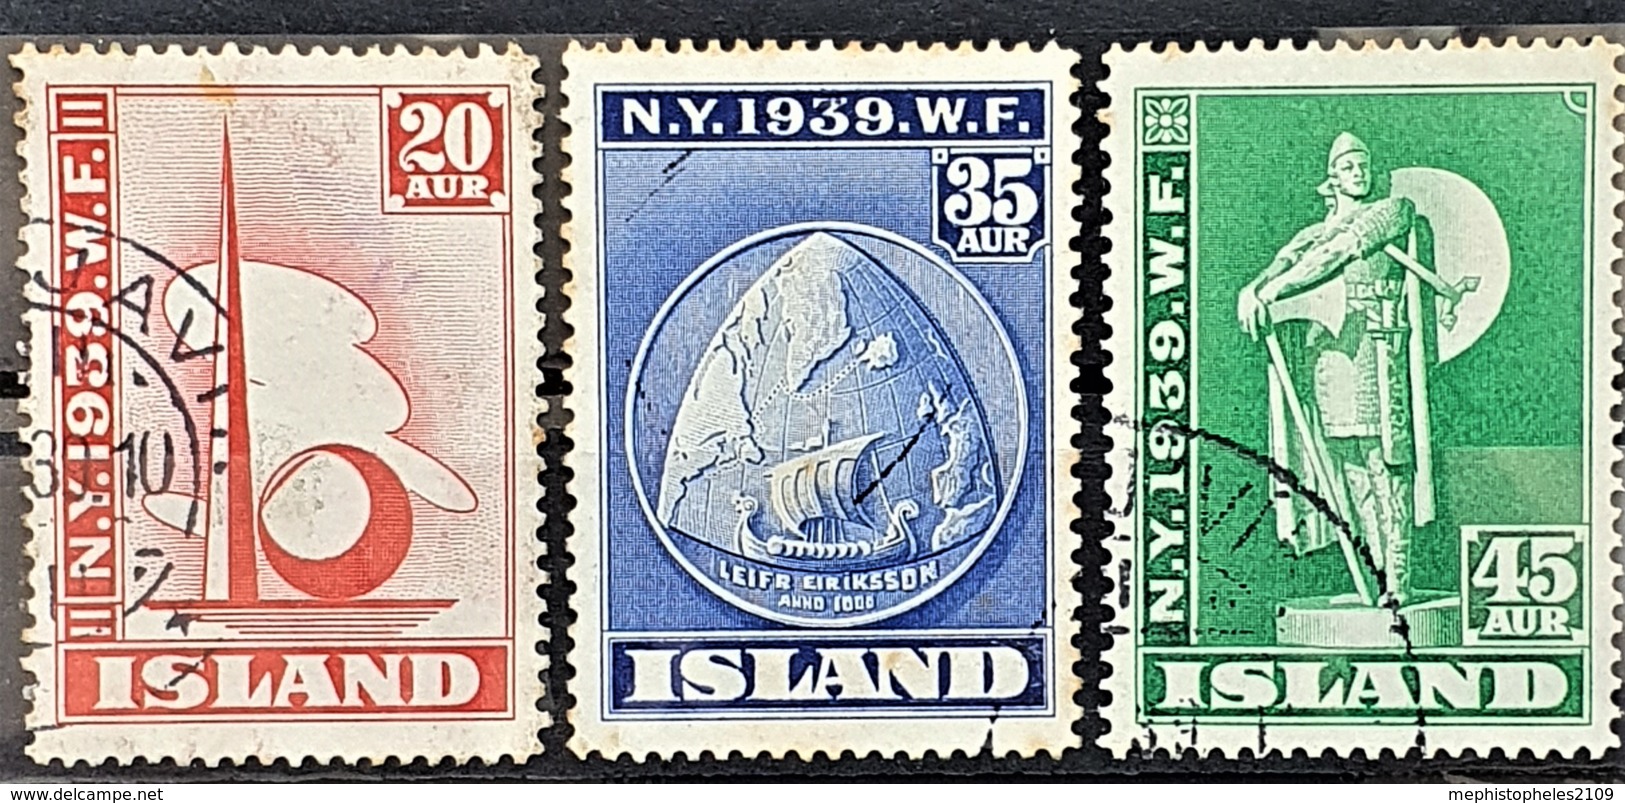 ICELAND 1939 - Canceled  - Sc# 213, 214, 215 - N.Y.1939.W.F. - Used Stamps